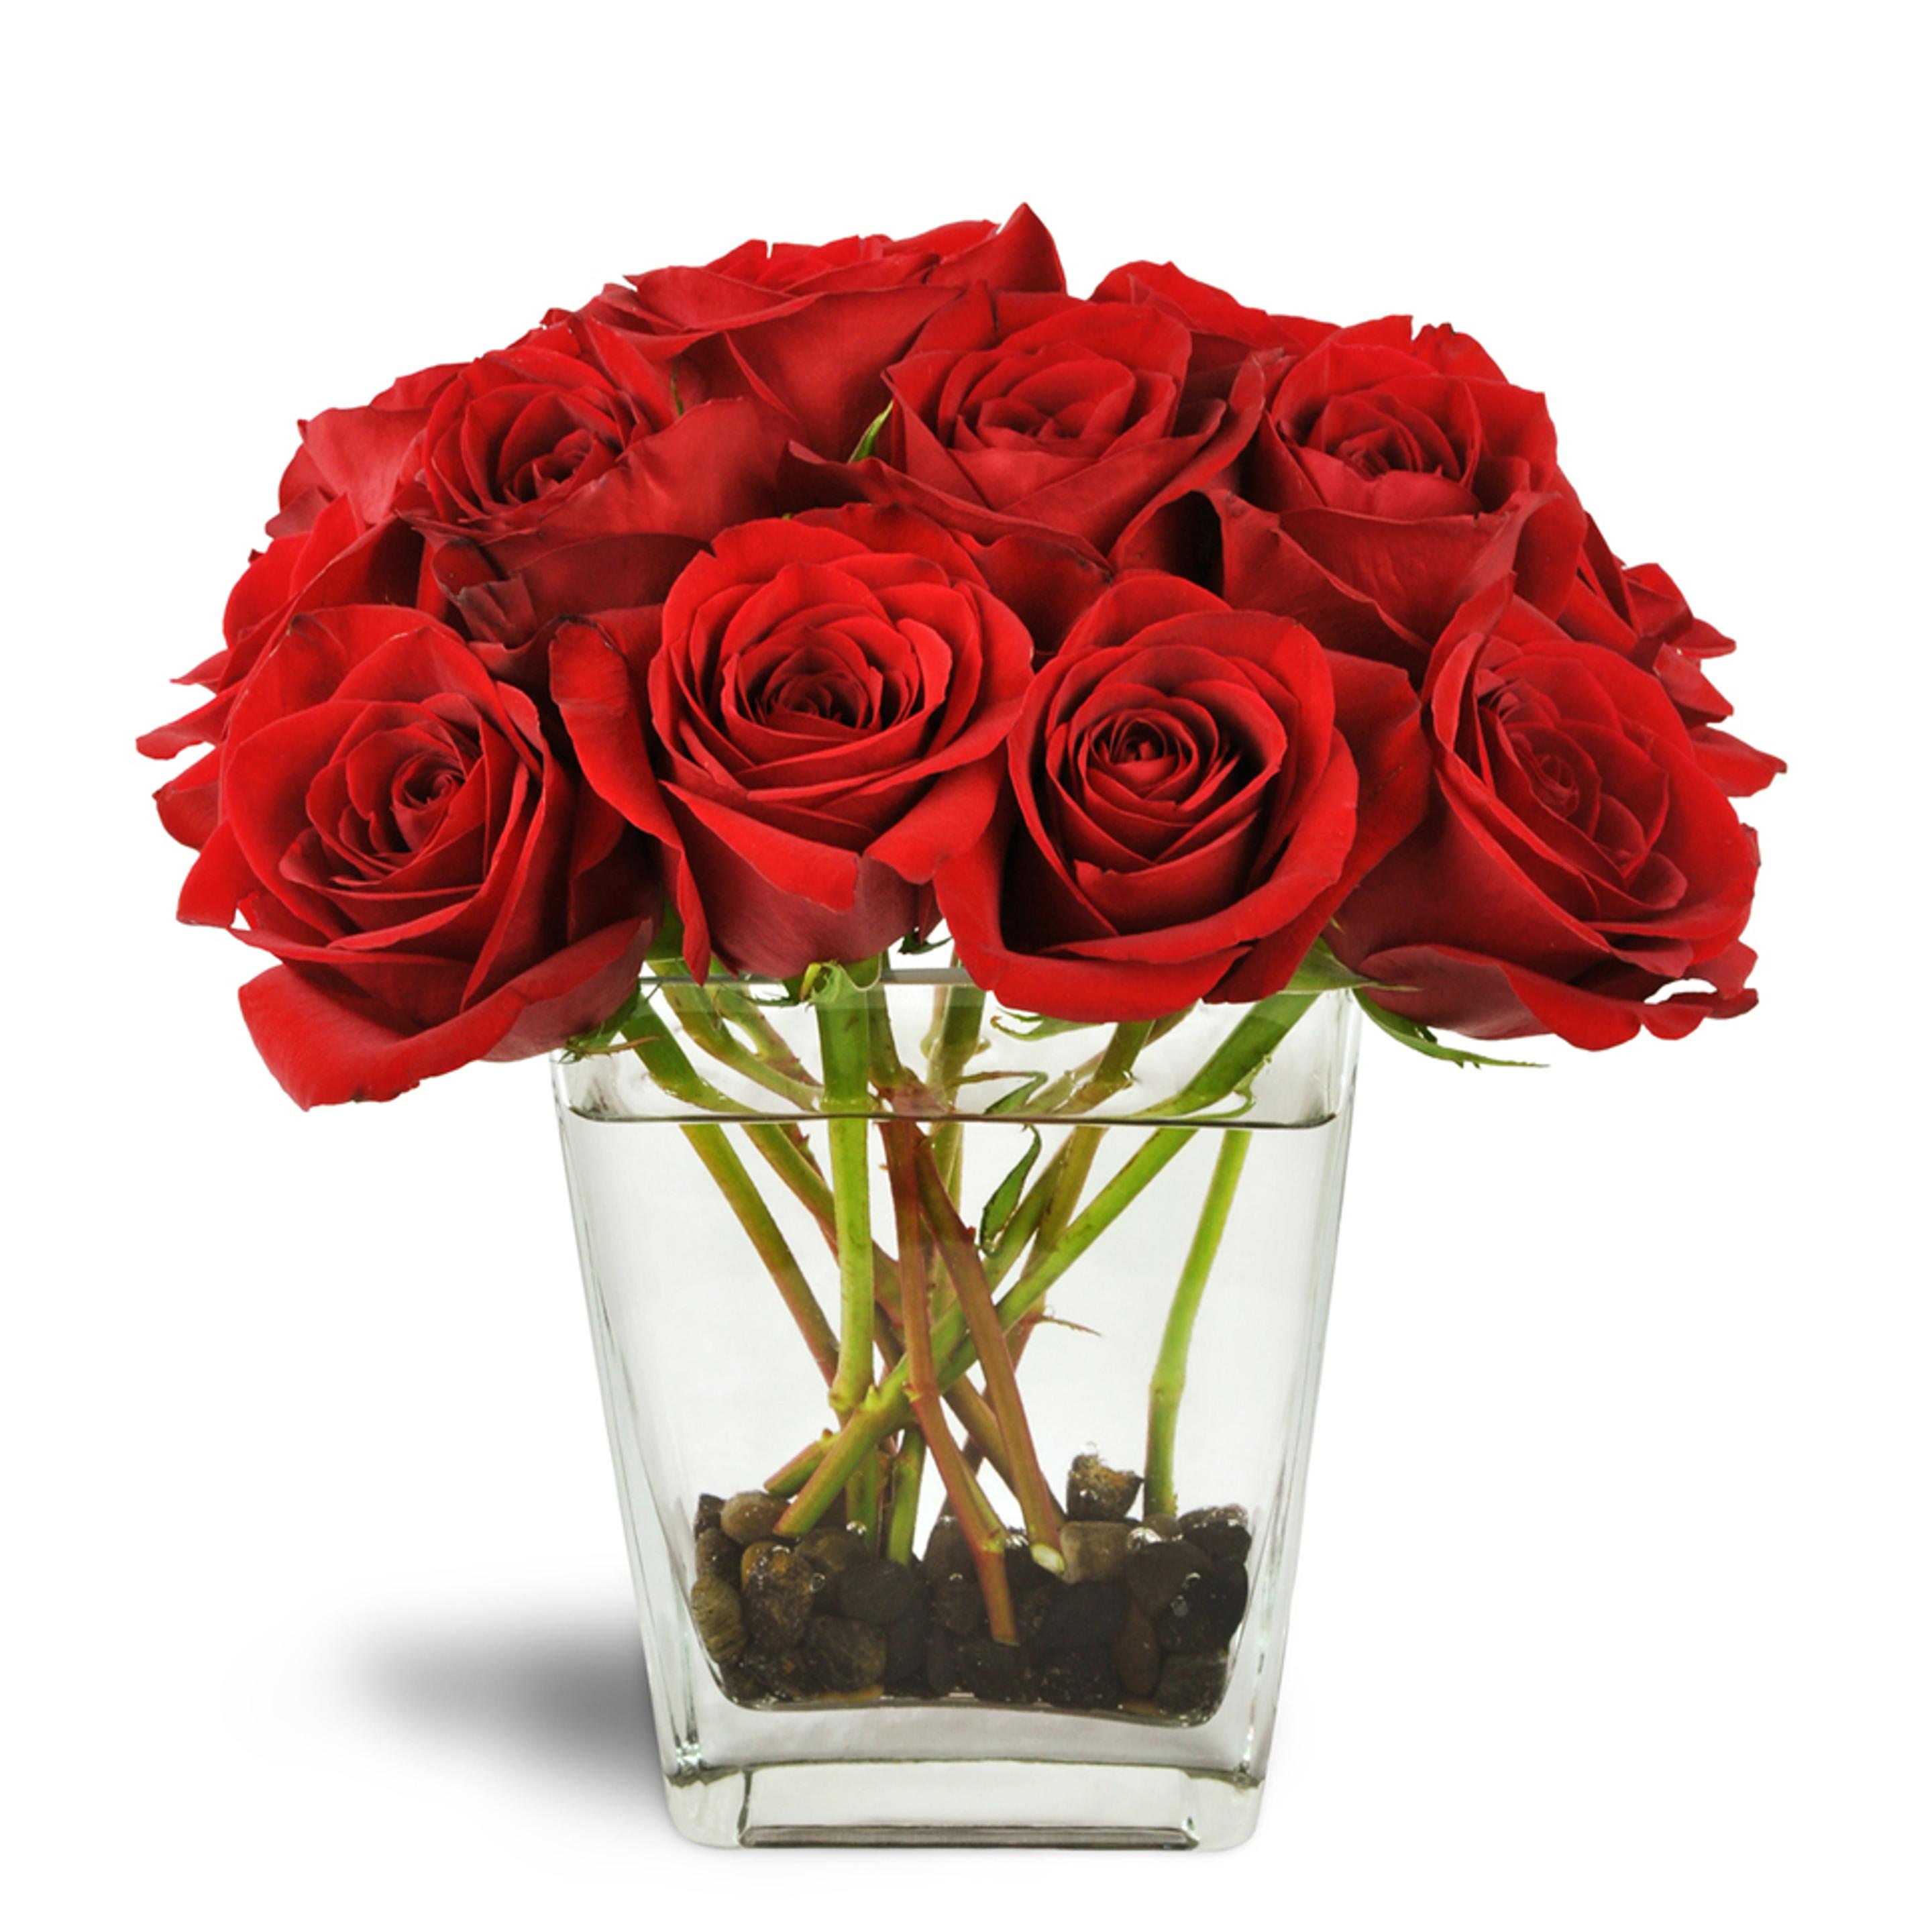 Red flower arrangement - Large red rose blooms burst from a clear glass vase lined with river rocks.